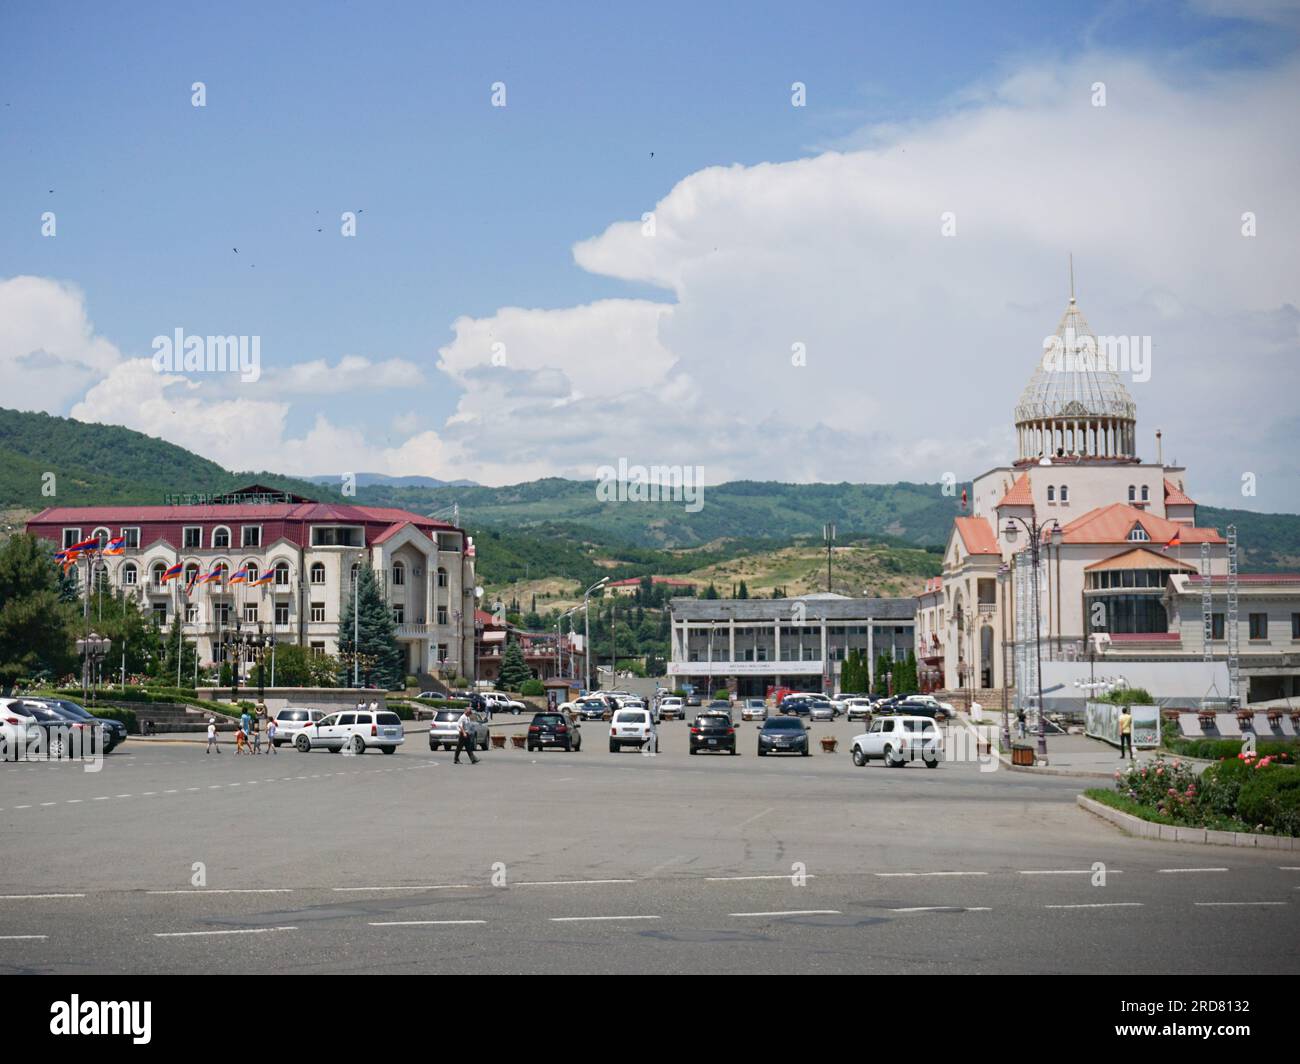 Stepanakert, Azerbaijan. 13th June, 2019. The view of Stepanakert, Nagorno-Karabakh during daytime. The unrecognised yet de facto independent country in South Caucasus, Nagorno-Karabakh (also known as Artsakh) has been in the longest-running territorial dispute between Azerbaijan and Armenia in post-Soviet Eurasia since the collapse of Soviet Union. It is mainly populated by ethnic Armenians. (Photo by Jasmine Leung/SOPA Images/Sipa USA) Credit: Sipa USA/Alamy Live News Stock Photo